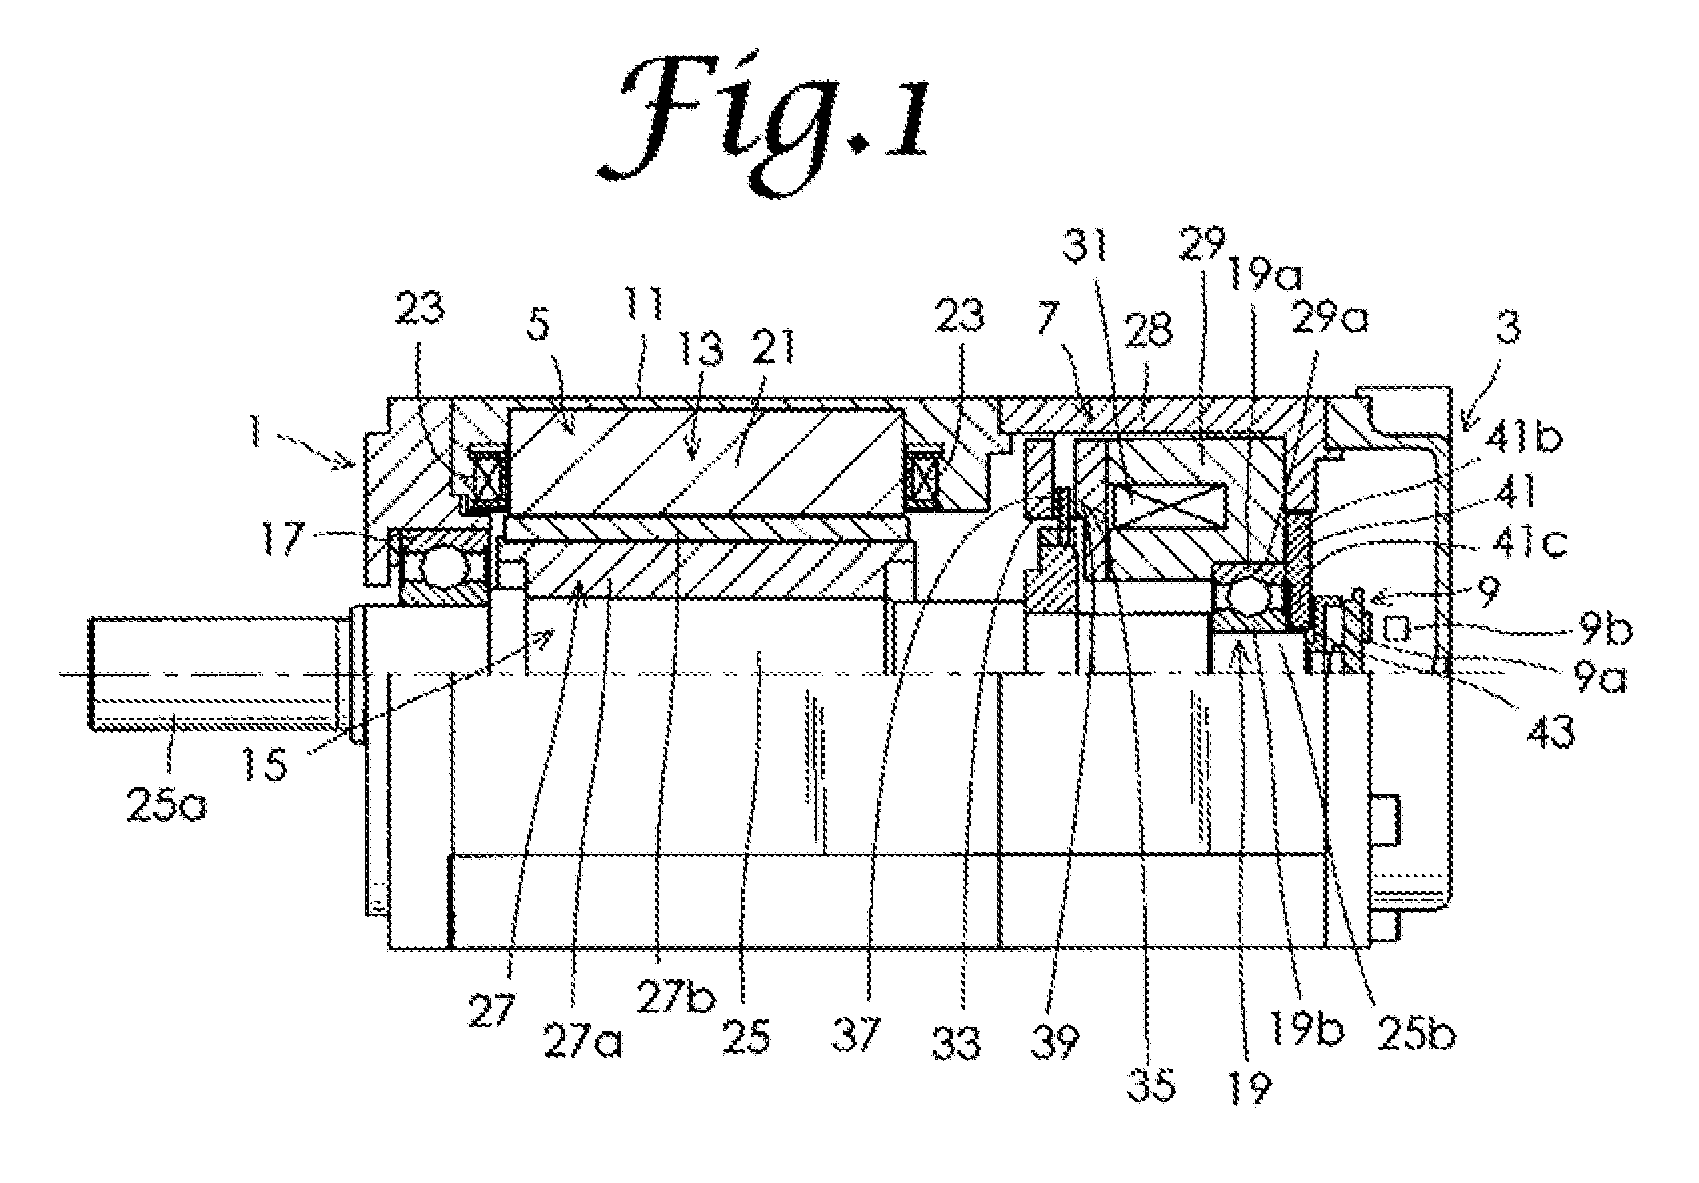 Motor with an electromagnetic brake